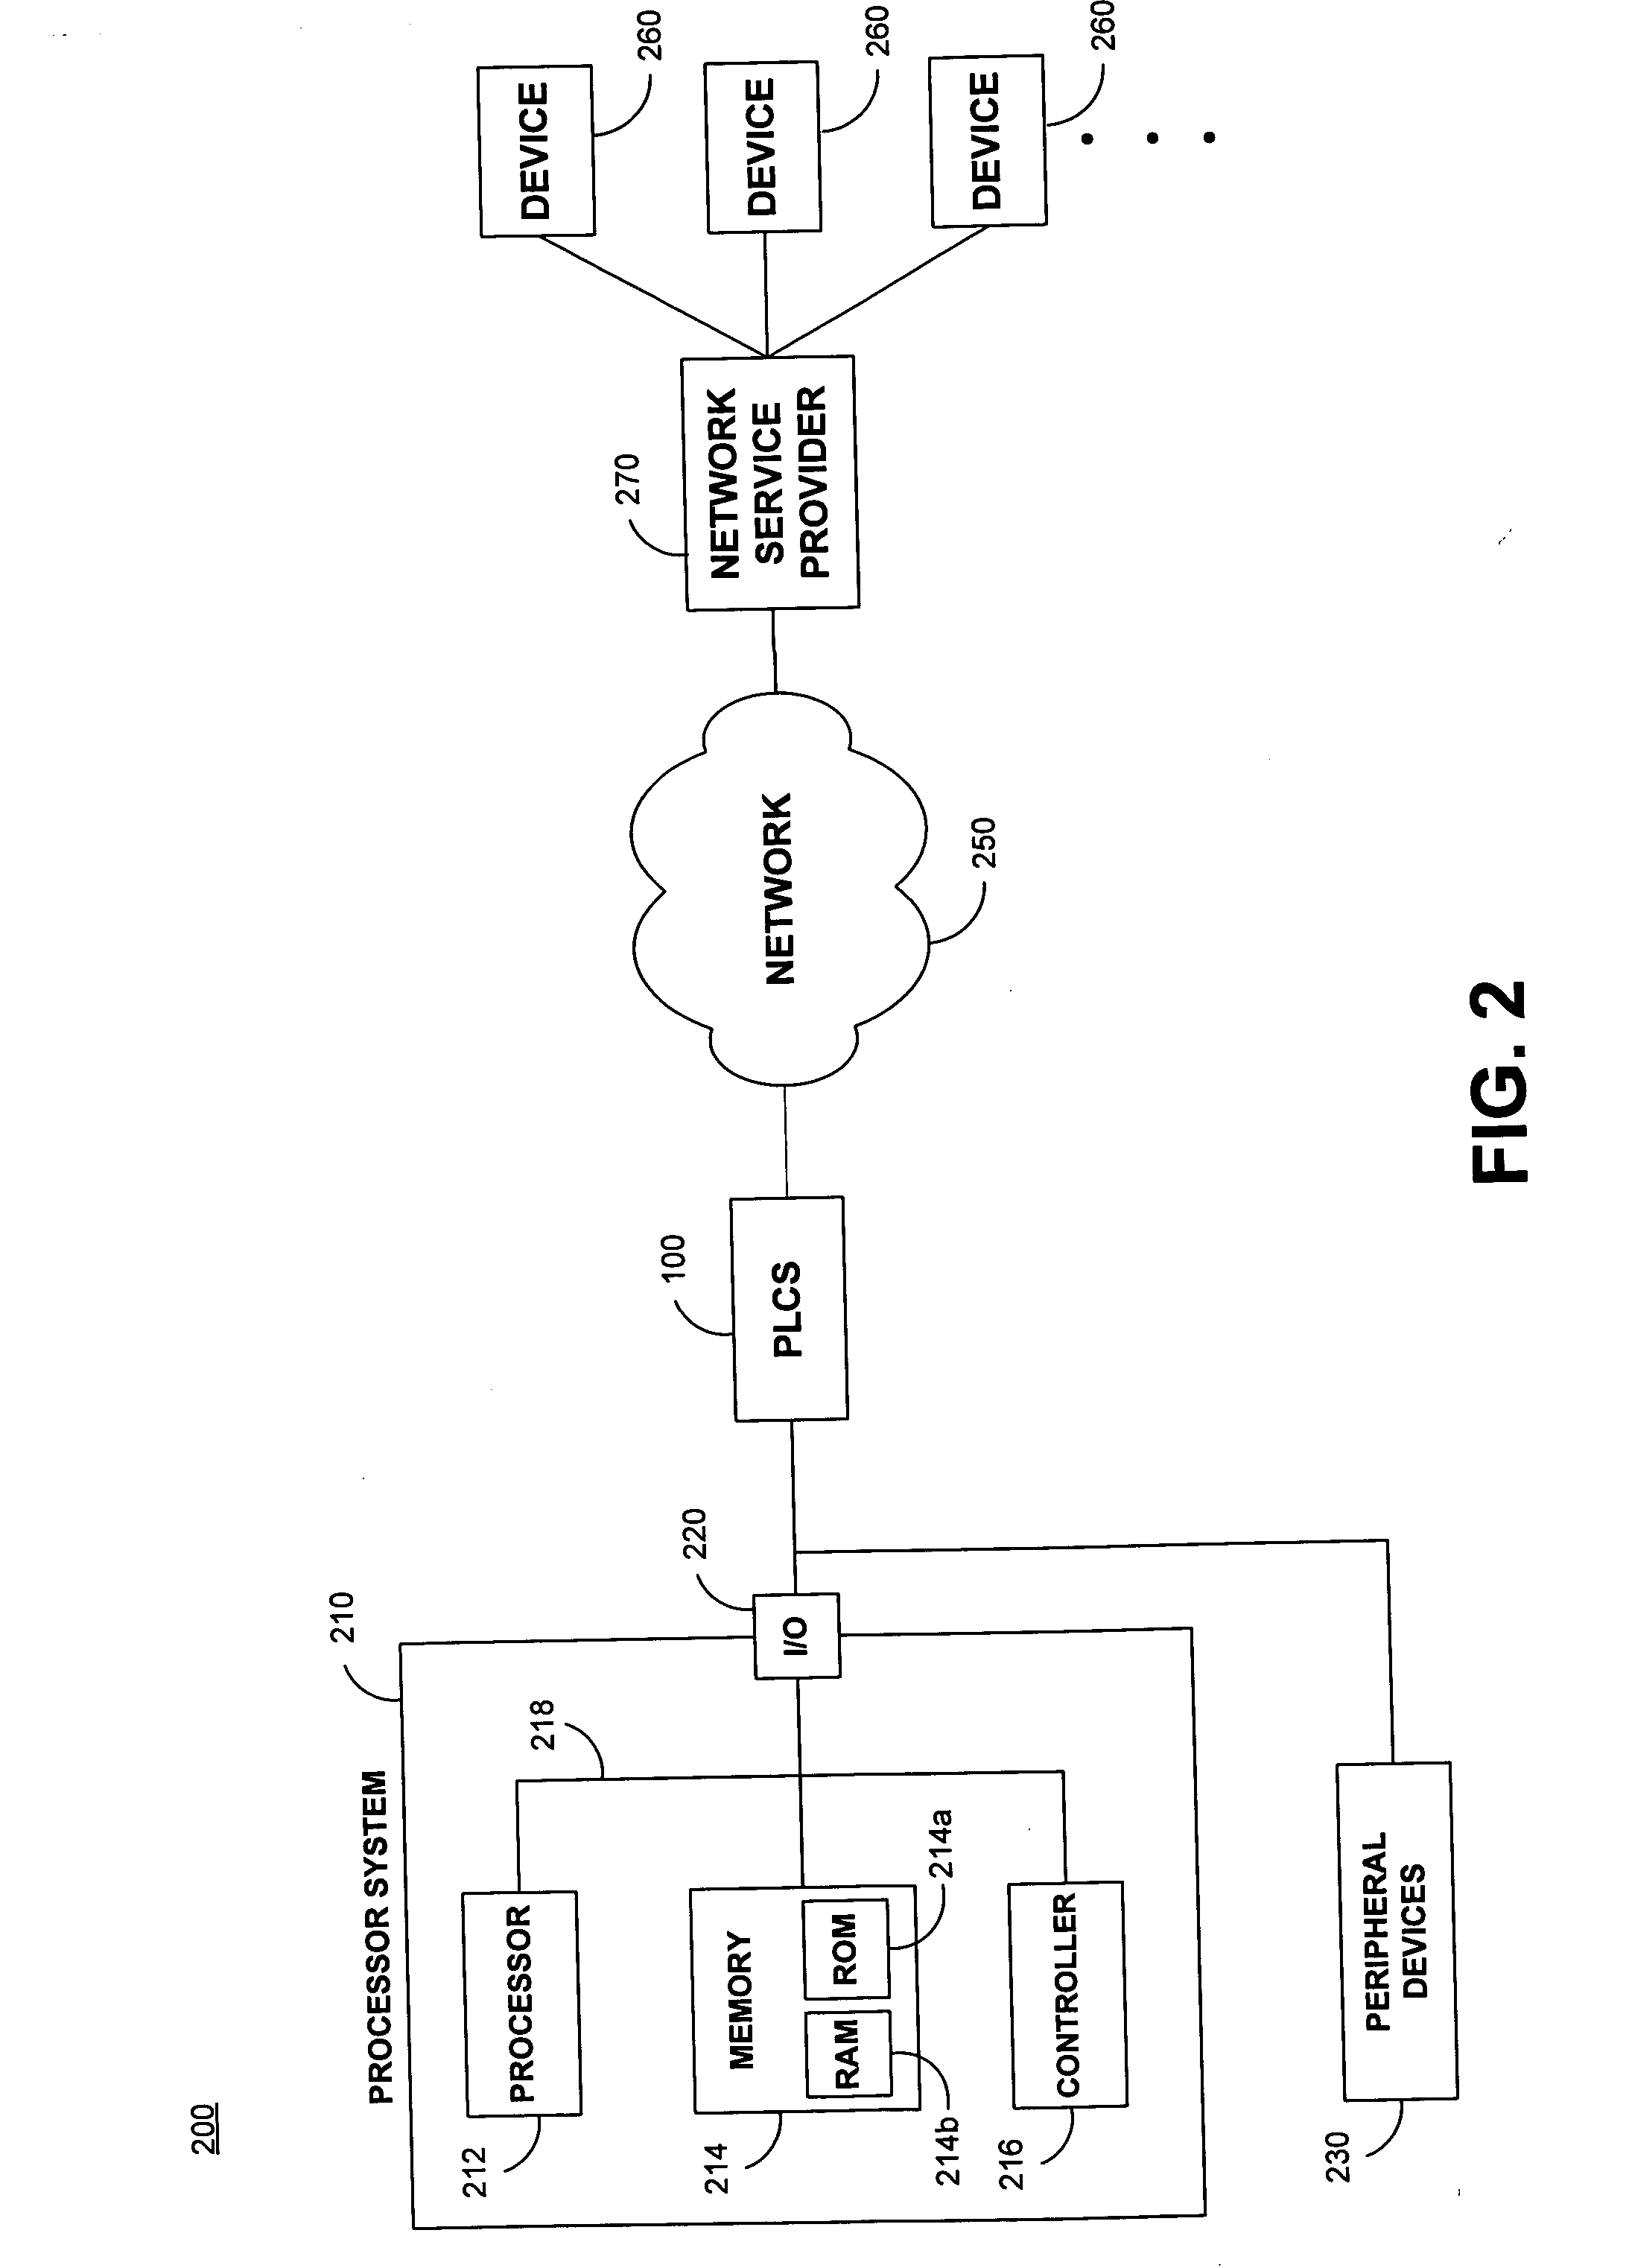 System and method for determining service availability and soliciting customers